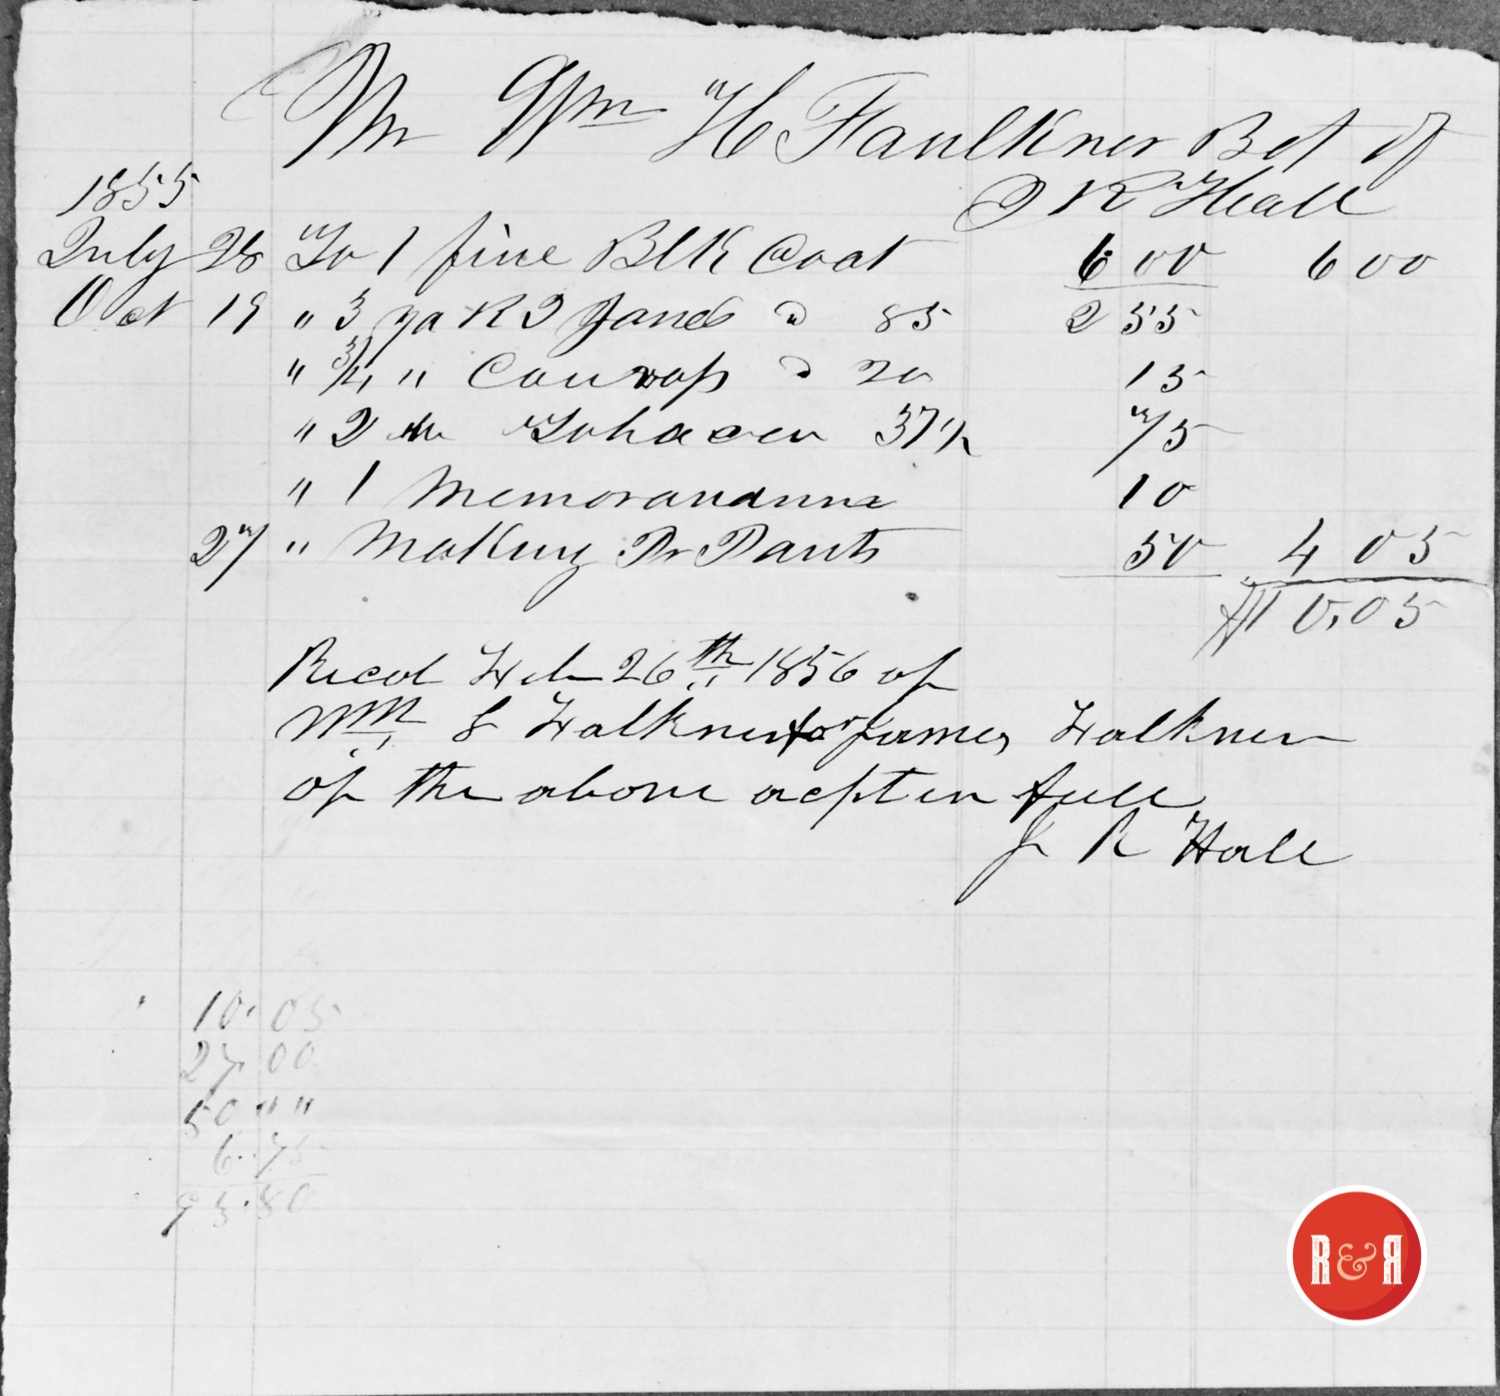 RECEIPT FROM J.R. HALL - CLOTHING